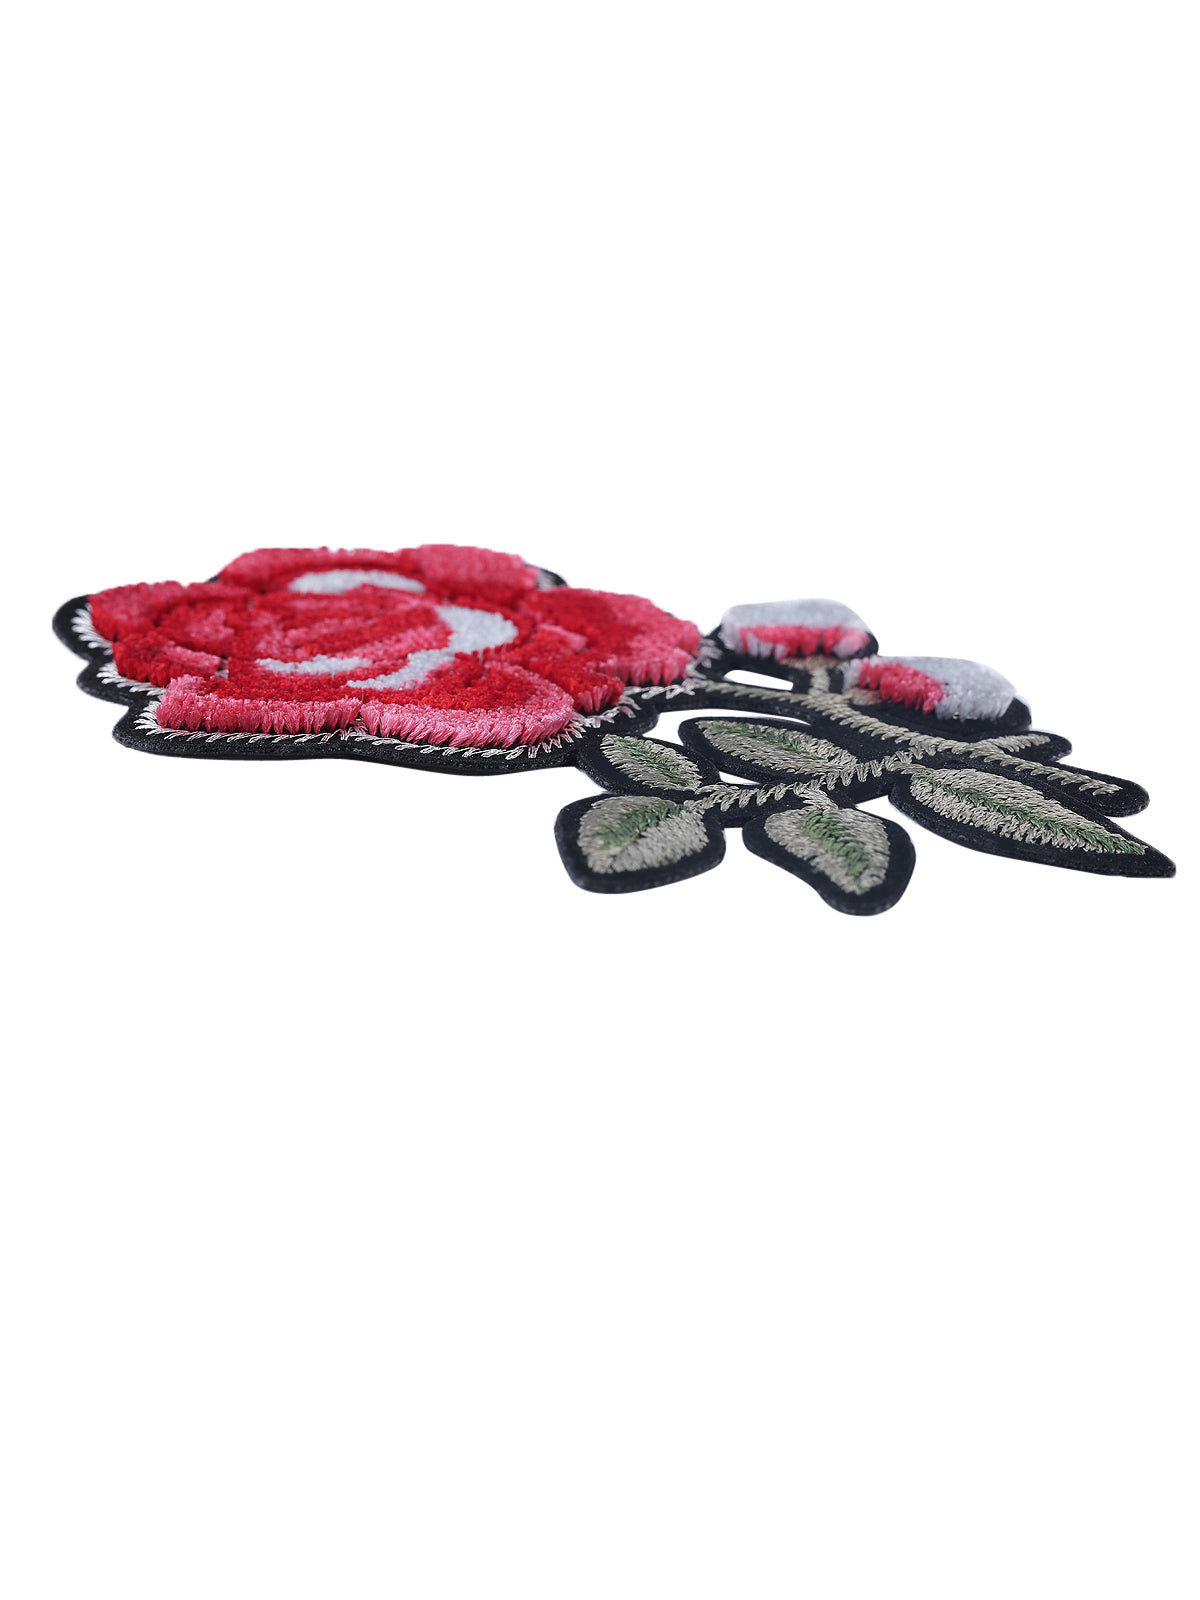 Gorgeous Embroidered Sew On Beaded Red Rose Patch